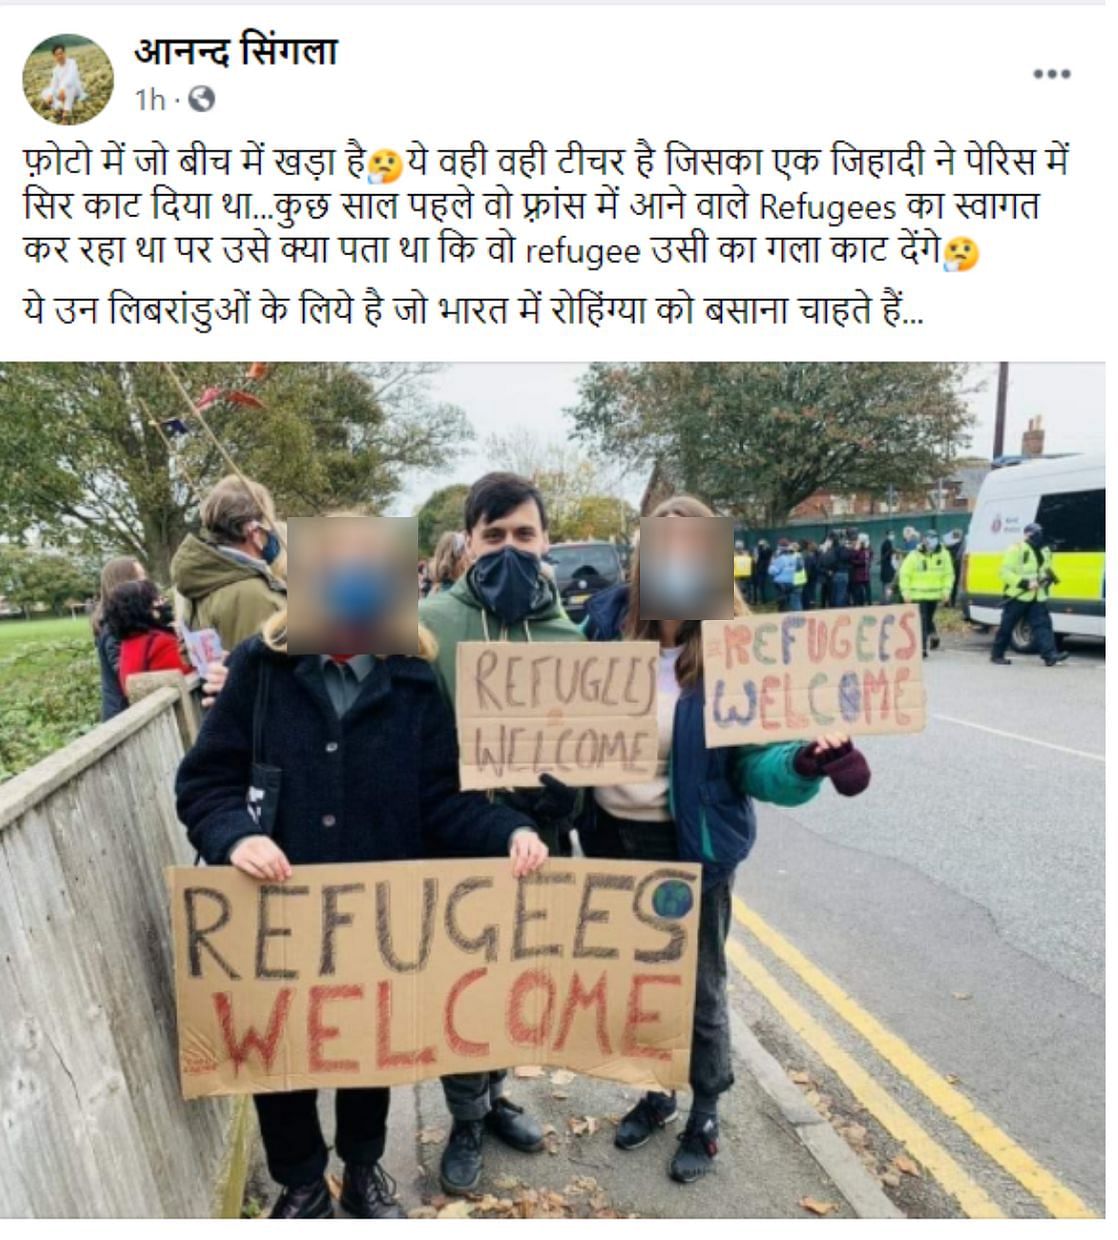 The image is unrelated to the victim in Paris and shows an event welcoming refugees in Kent, England.